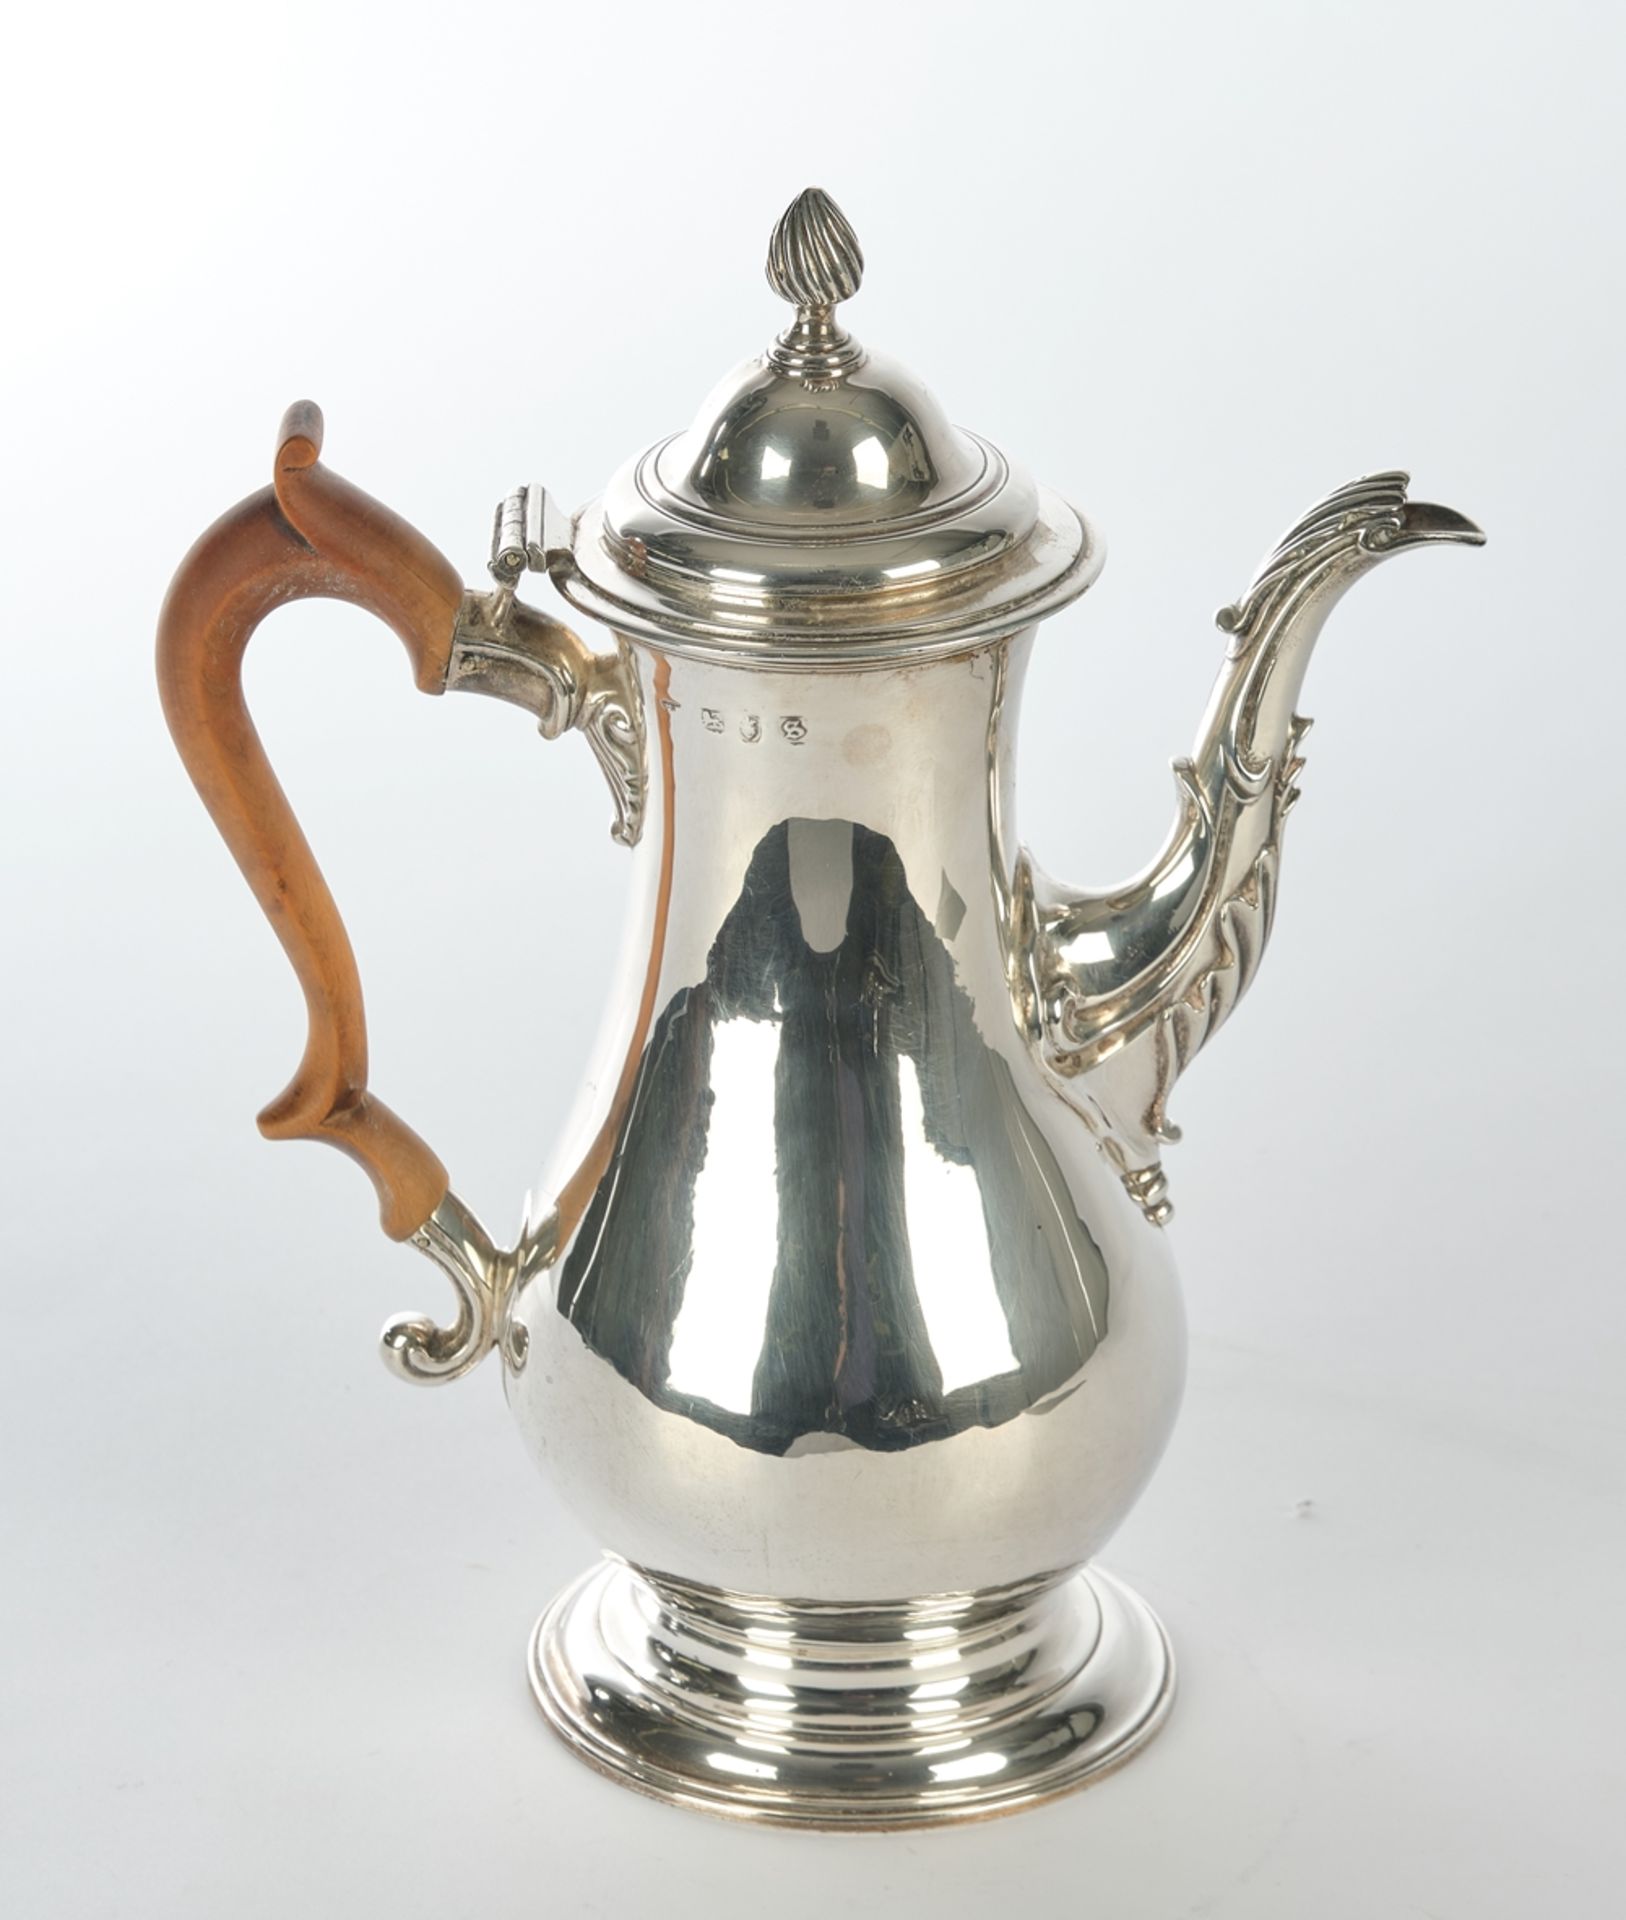 Coffee pot, silver 925, London, 1773, Ebenezer Coker, pear-shaped vessel on a moulded round foot, c - Image 2 of 3